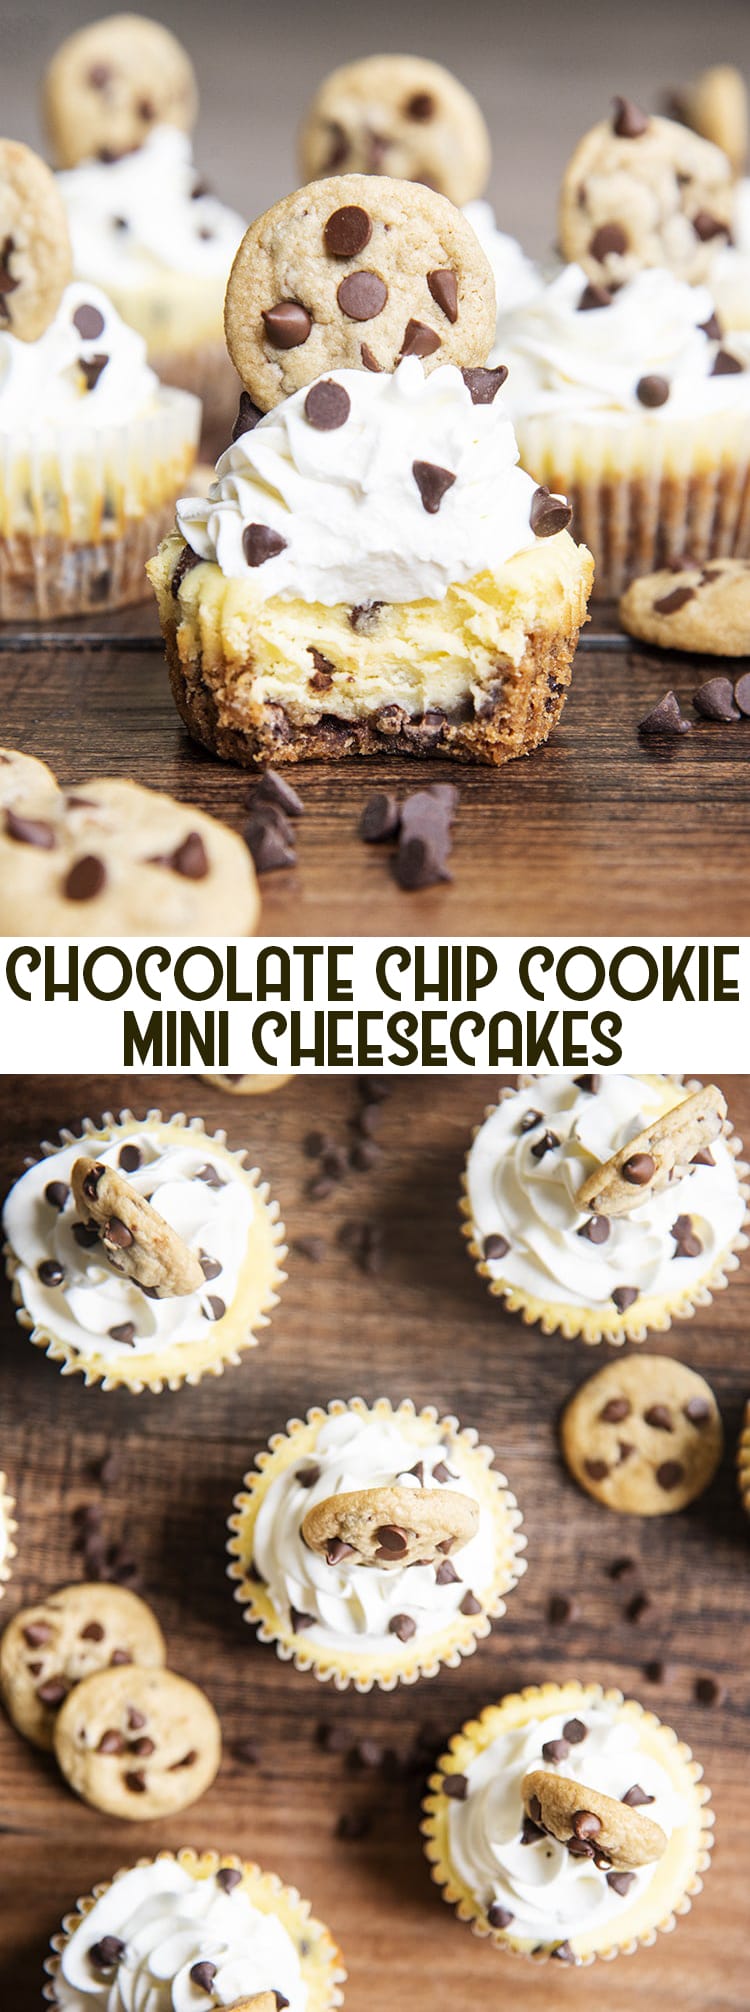 Above image shots of mini chocolate chip cookie cheesecakes with text overlay of same wording.